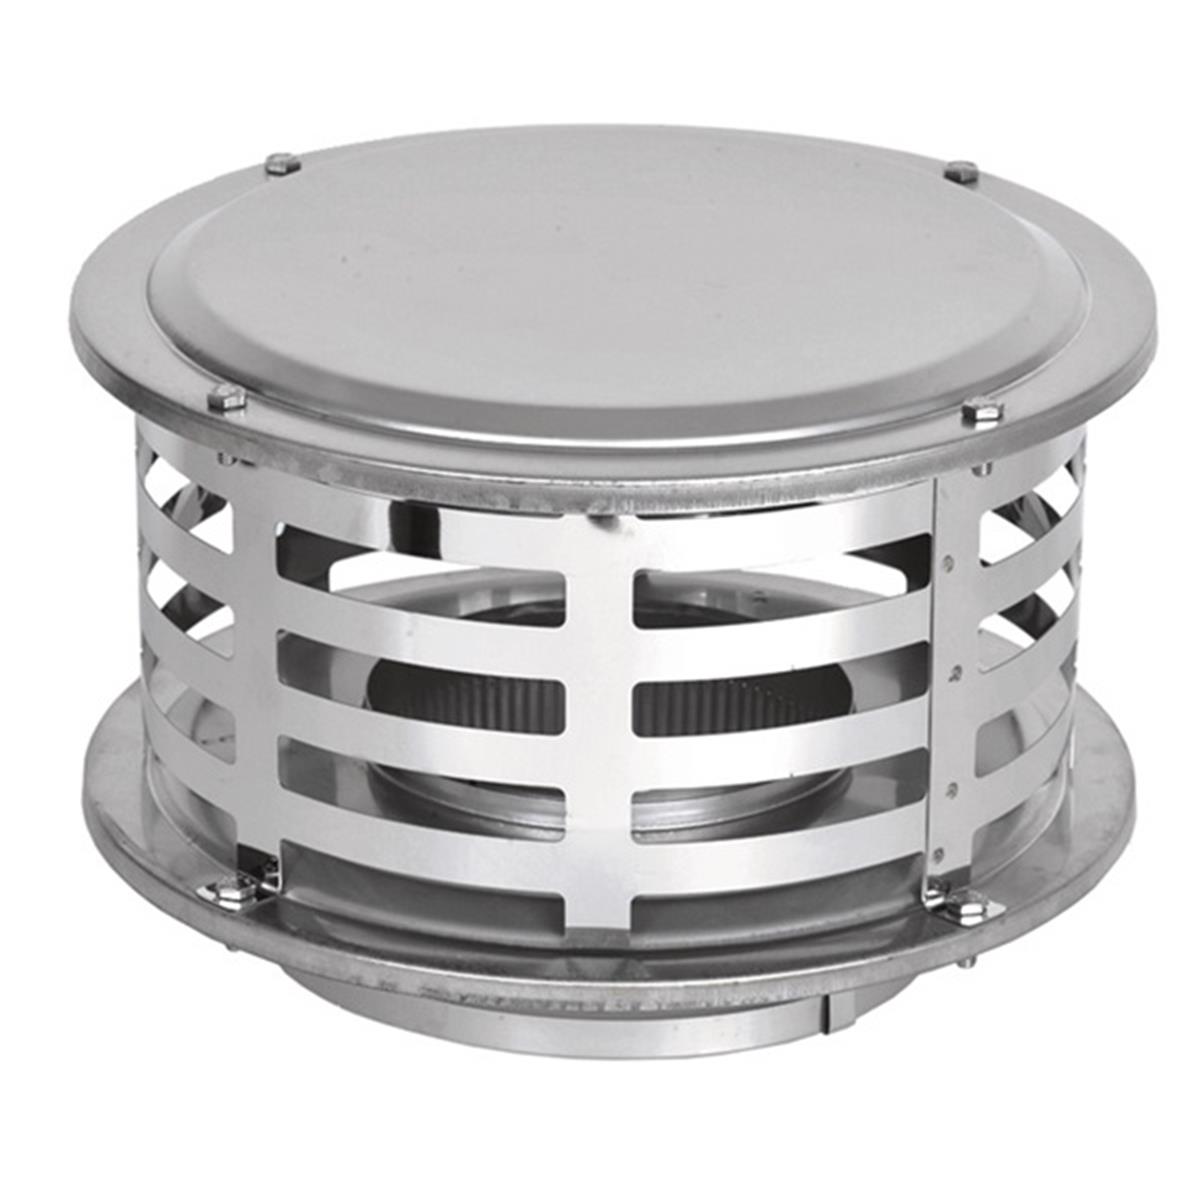 3601791 8 In. Ventis Class-a All Fuel Chimney With 304l Stainless Steel Spark Arrestor Screen